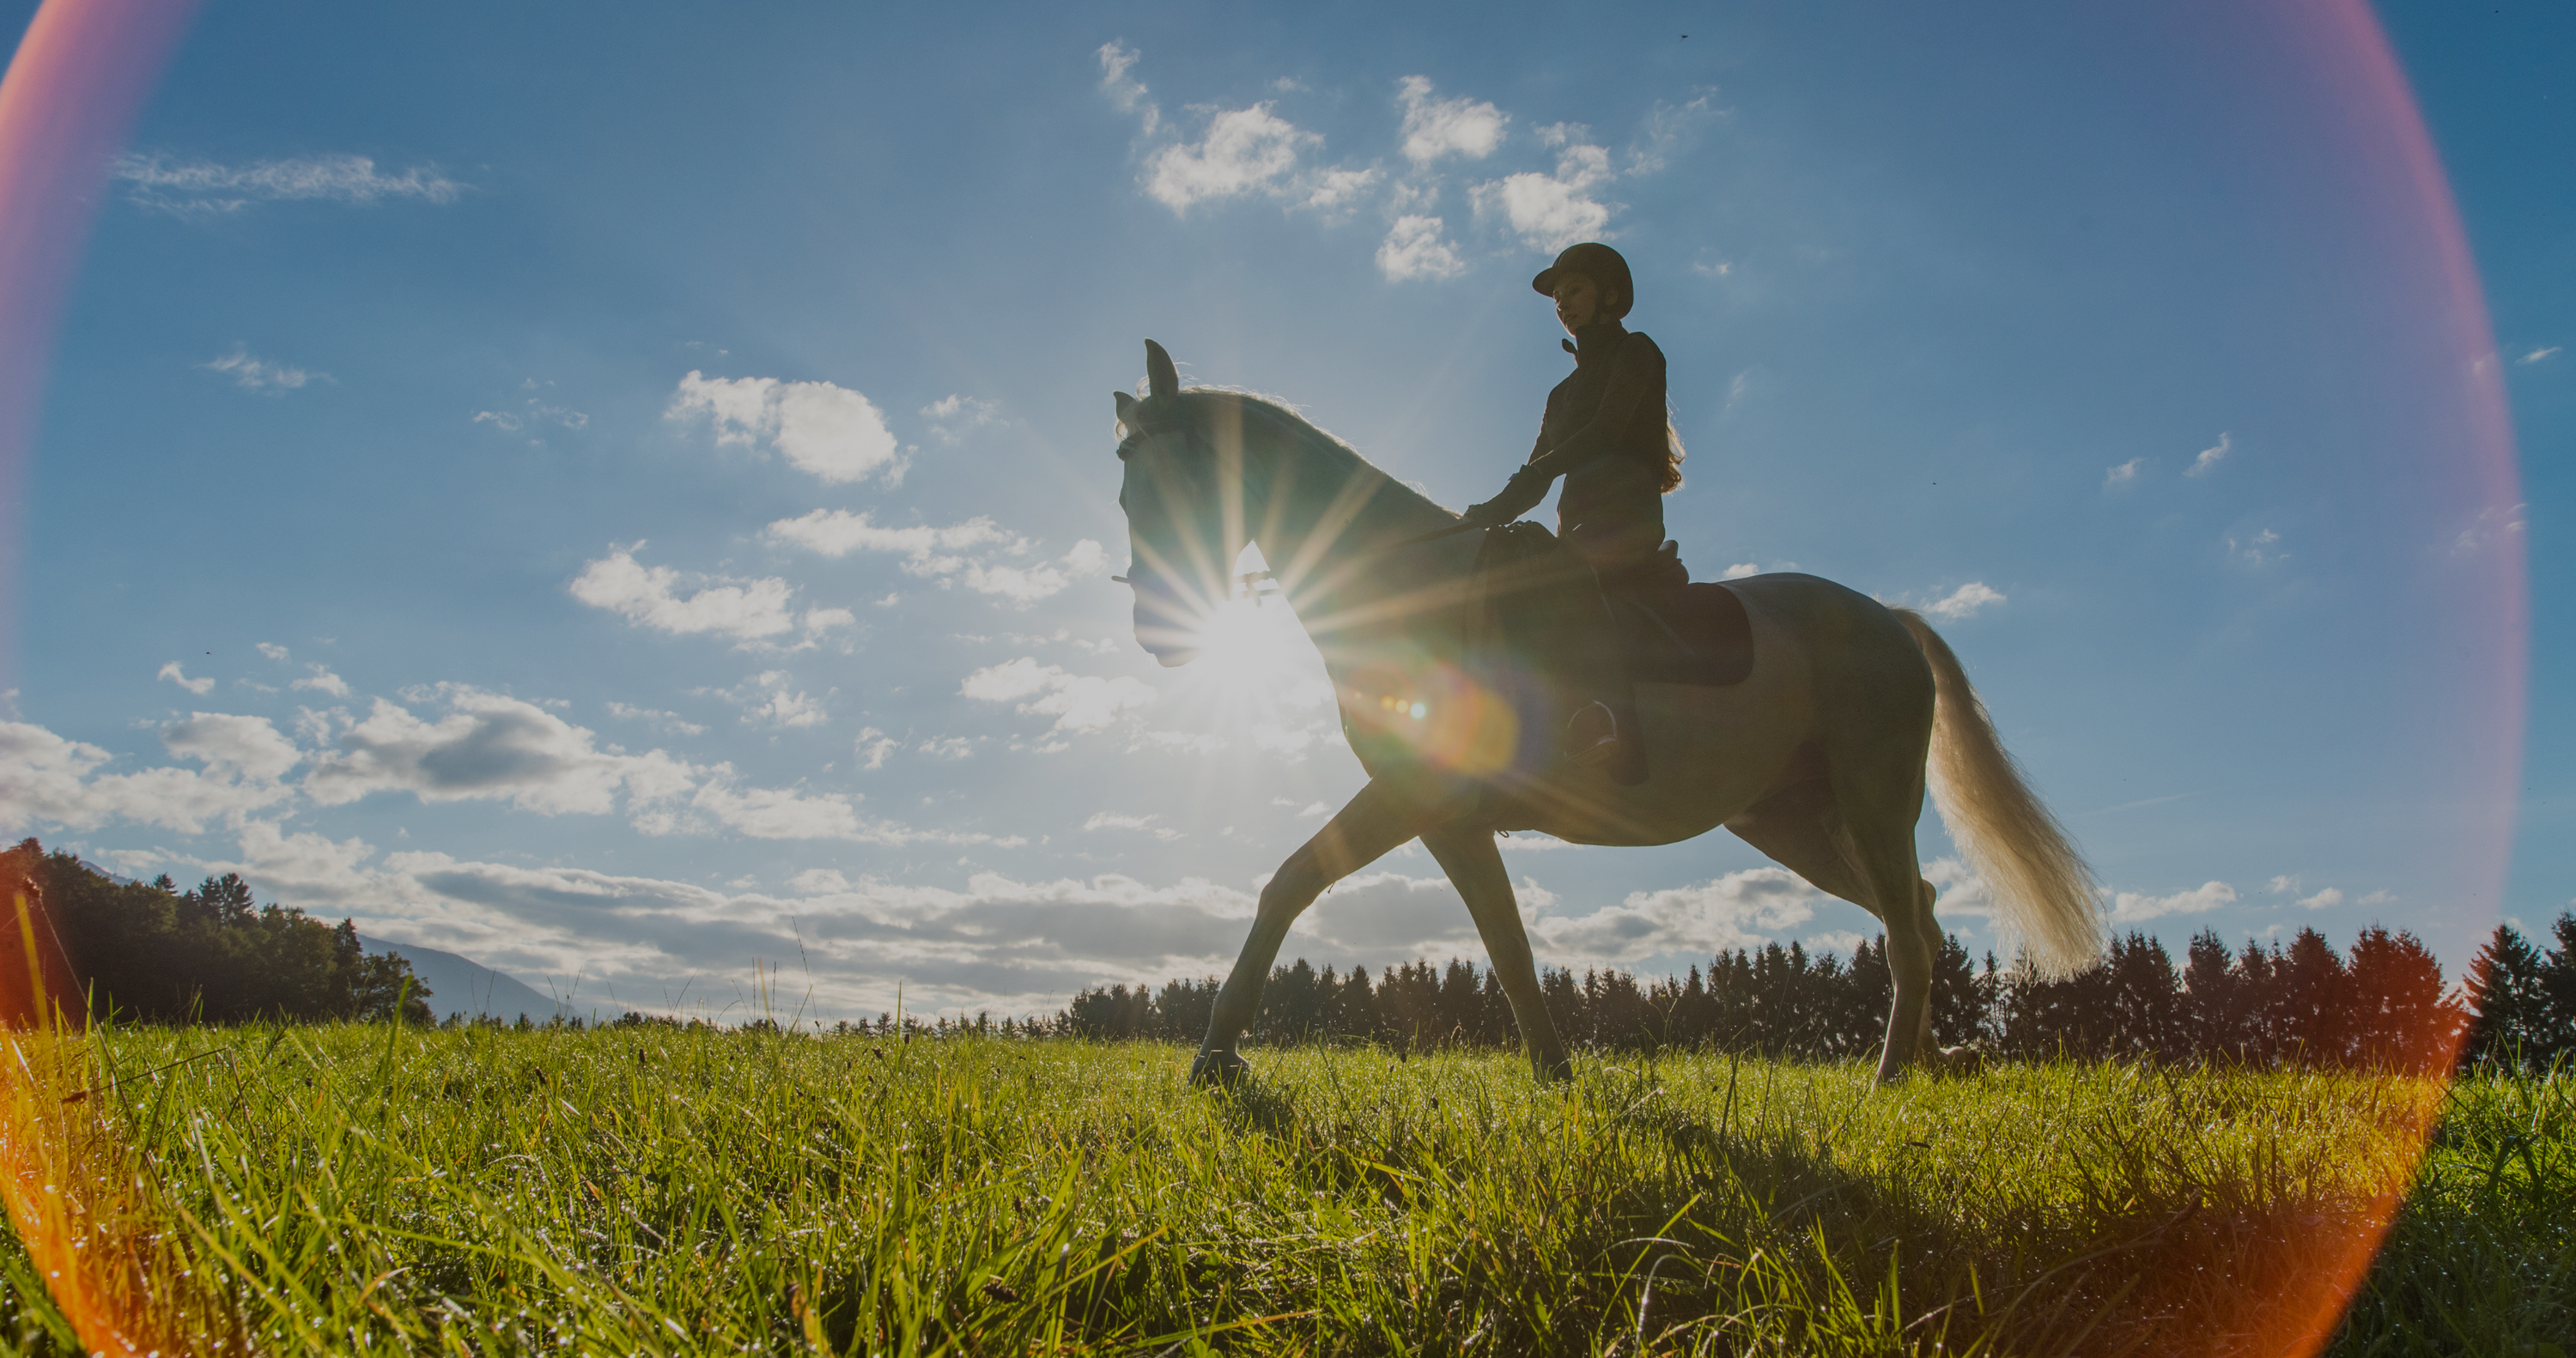 horse fly repellent for trail riding, horse and rider in silhouette riding through field on sunny day